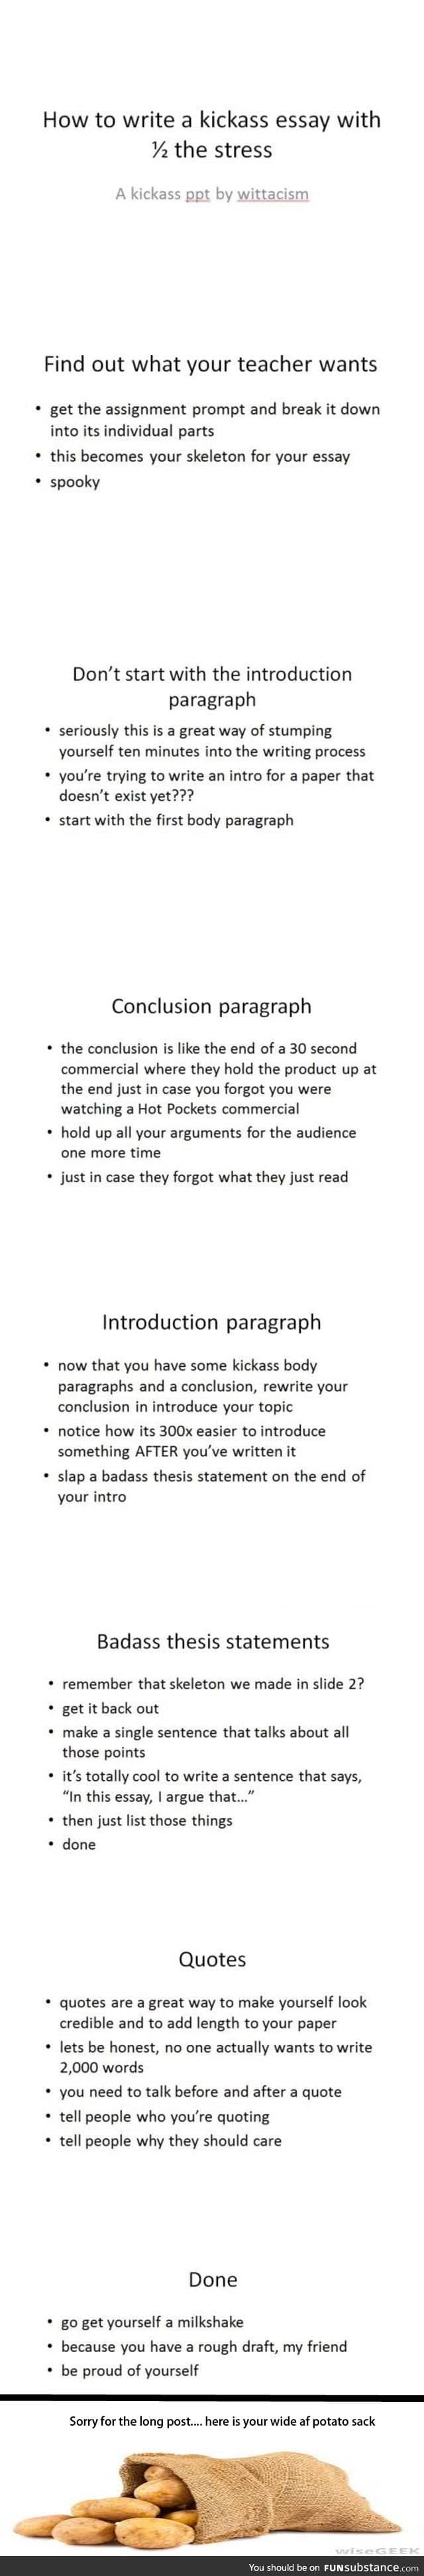 How to write an essay